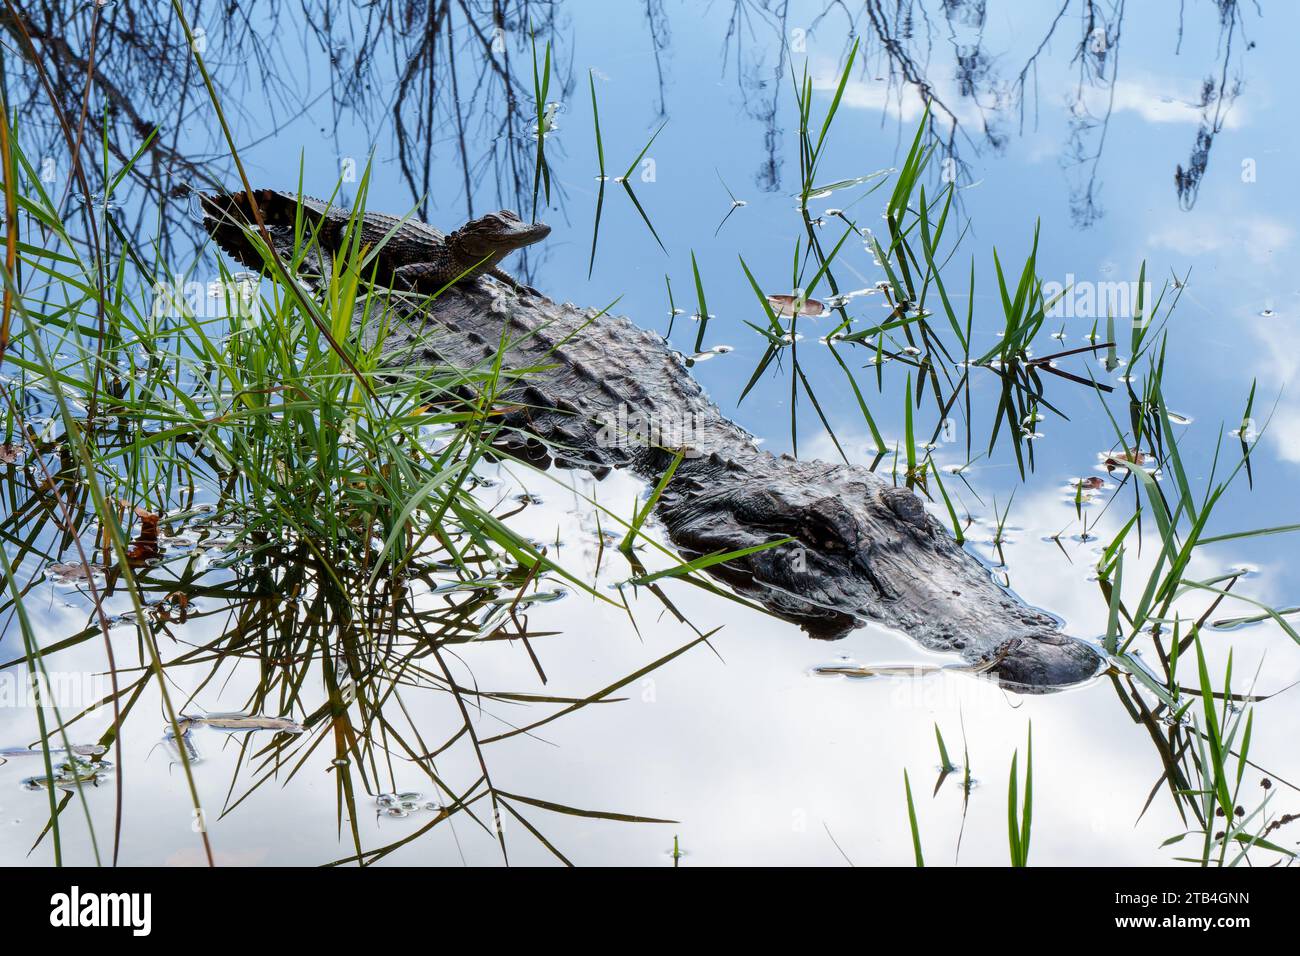 Lefty the alligator in Gulf State Park in Alabama with one of her baby alligators sitting on her back. Stock Photo